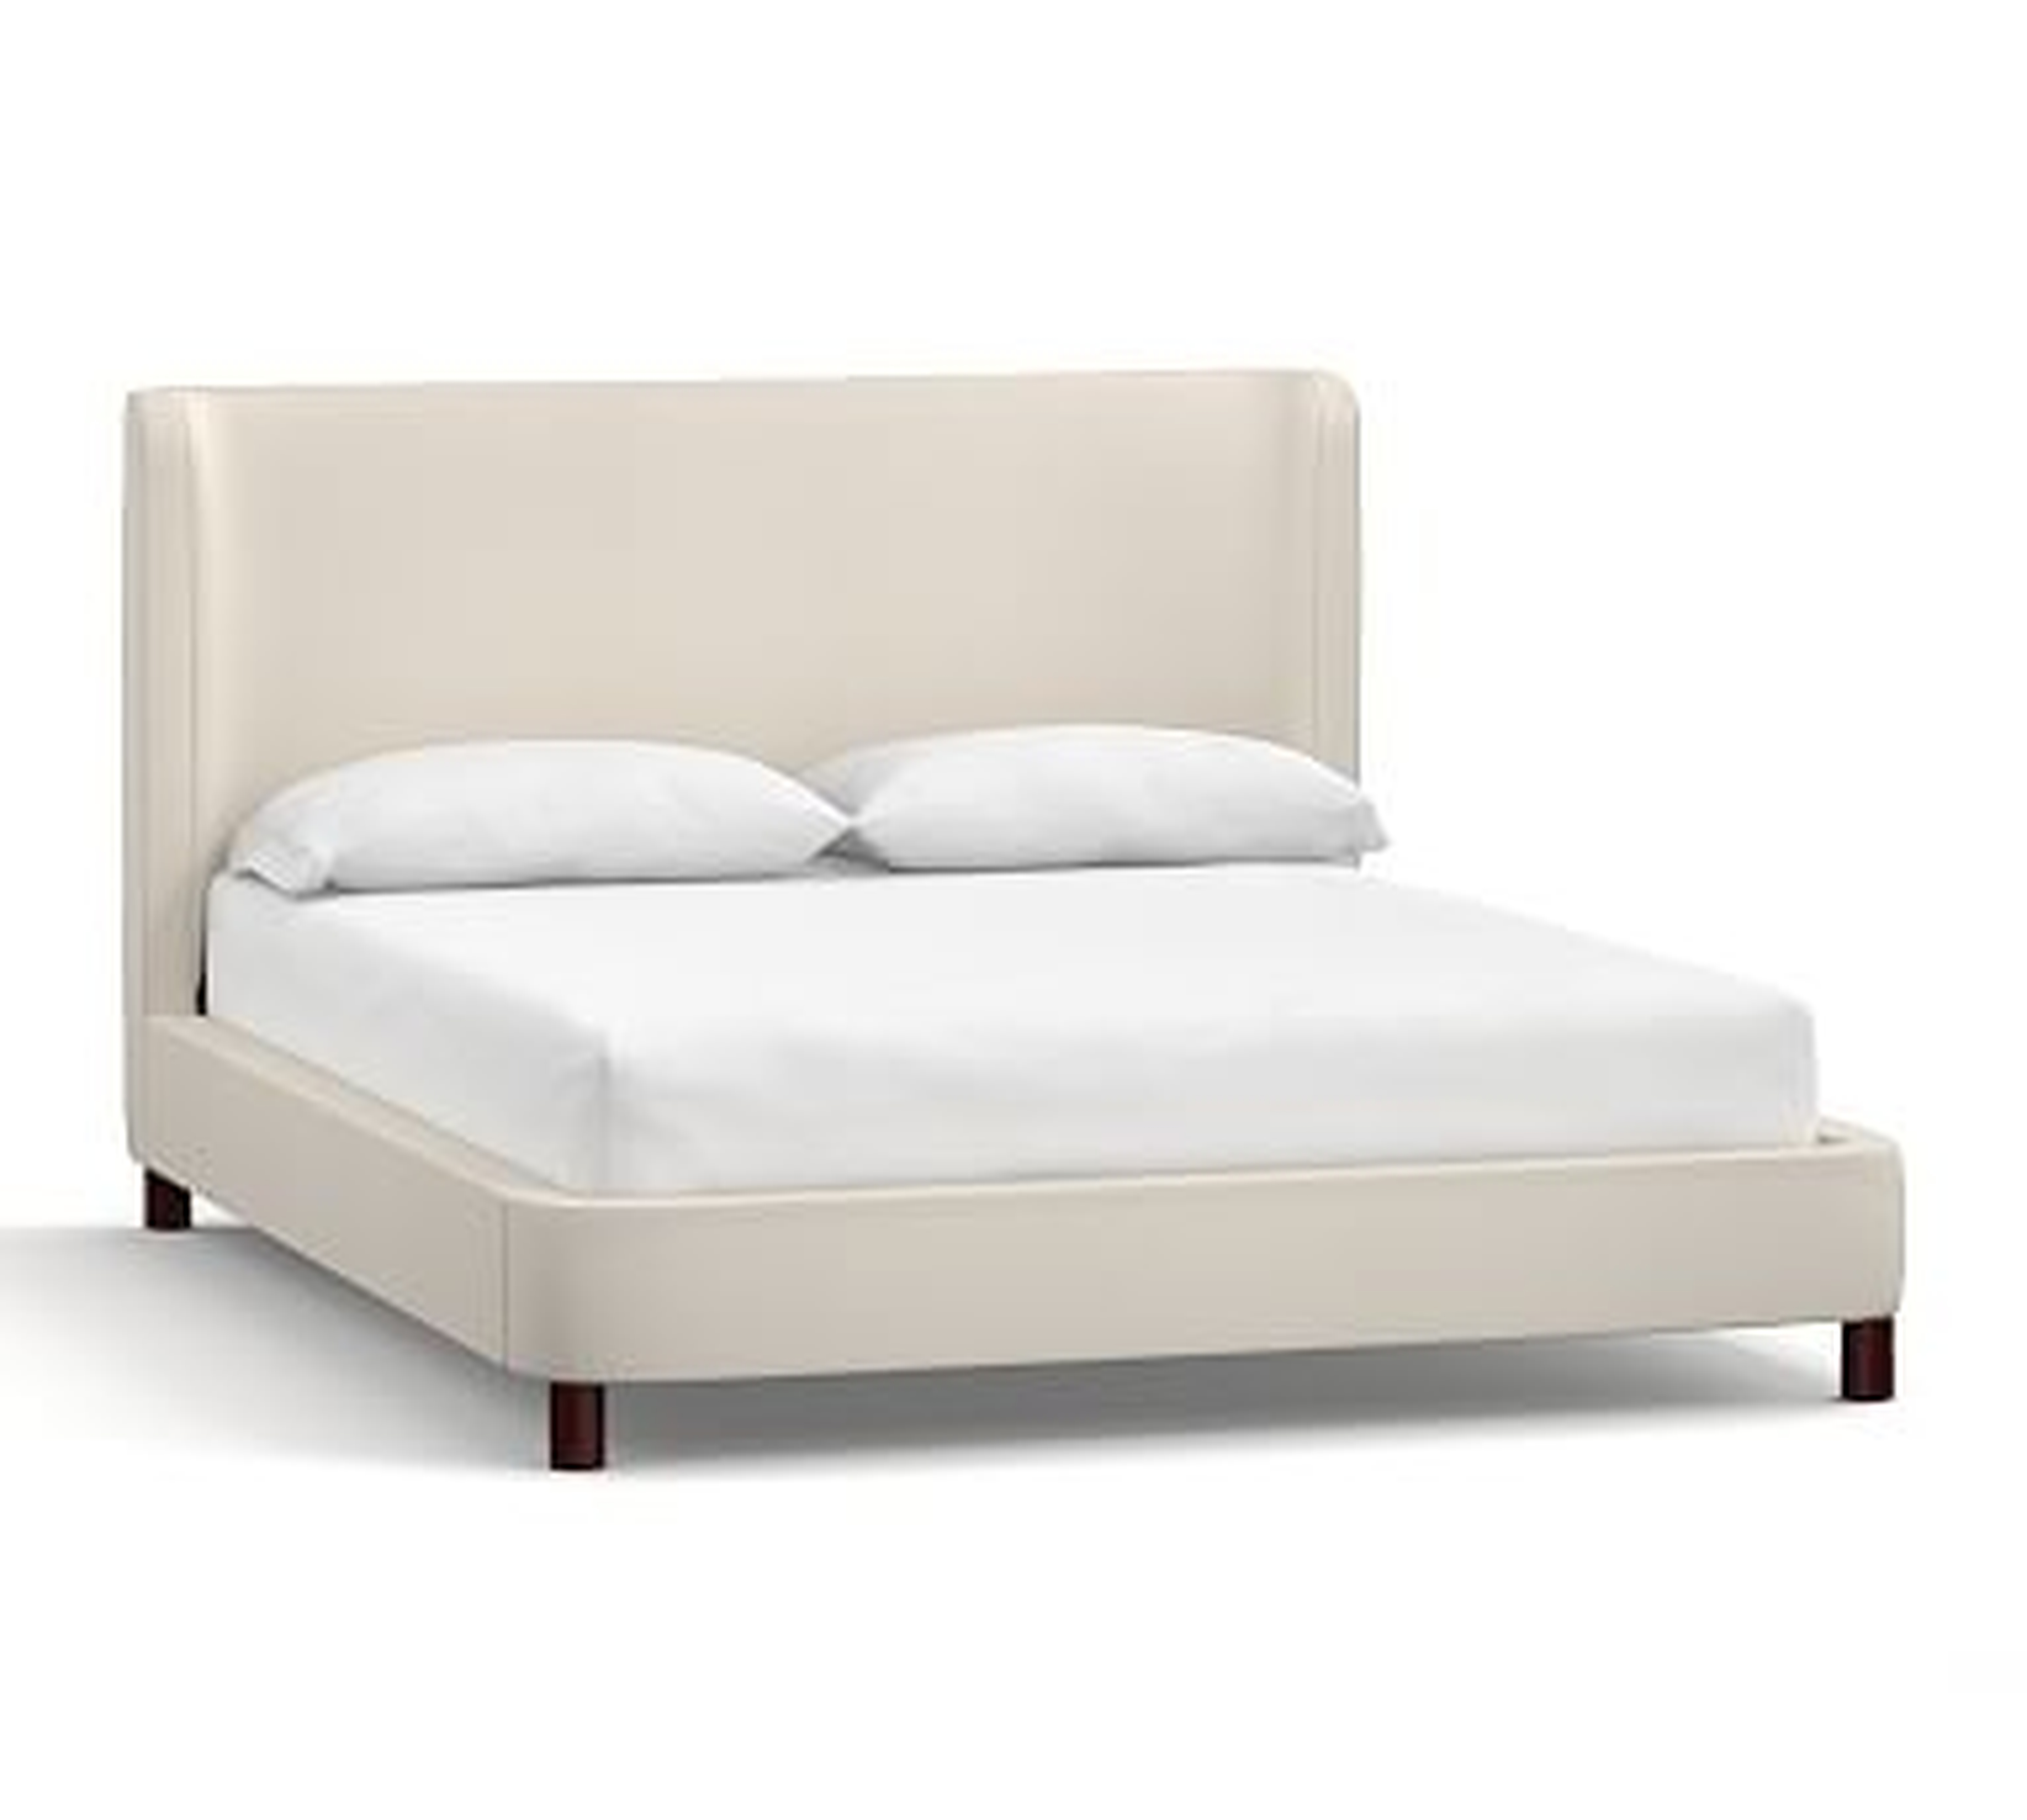 Rochella Upholstered Bed, King, Twill Cream - Pottery Barn